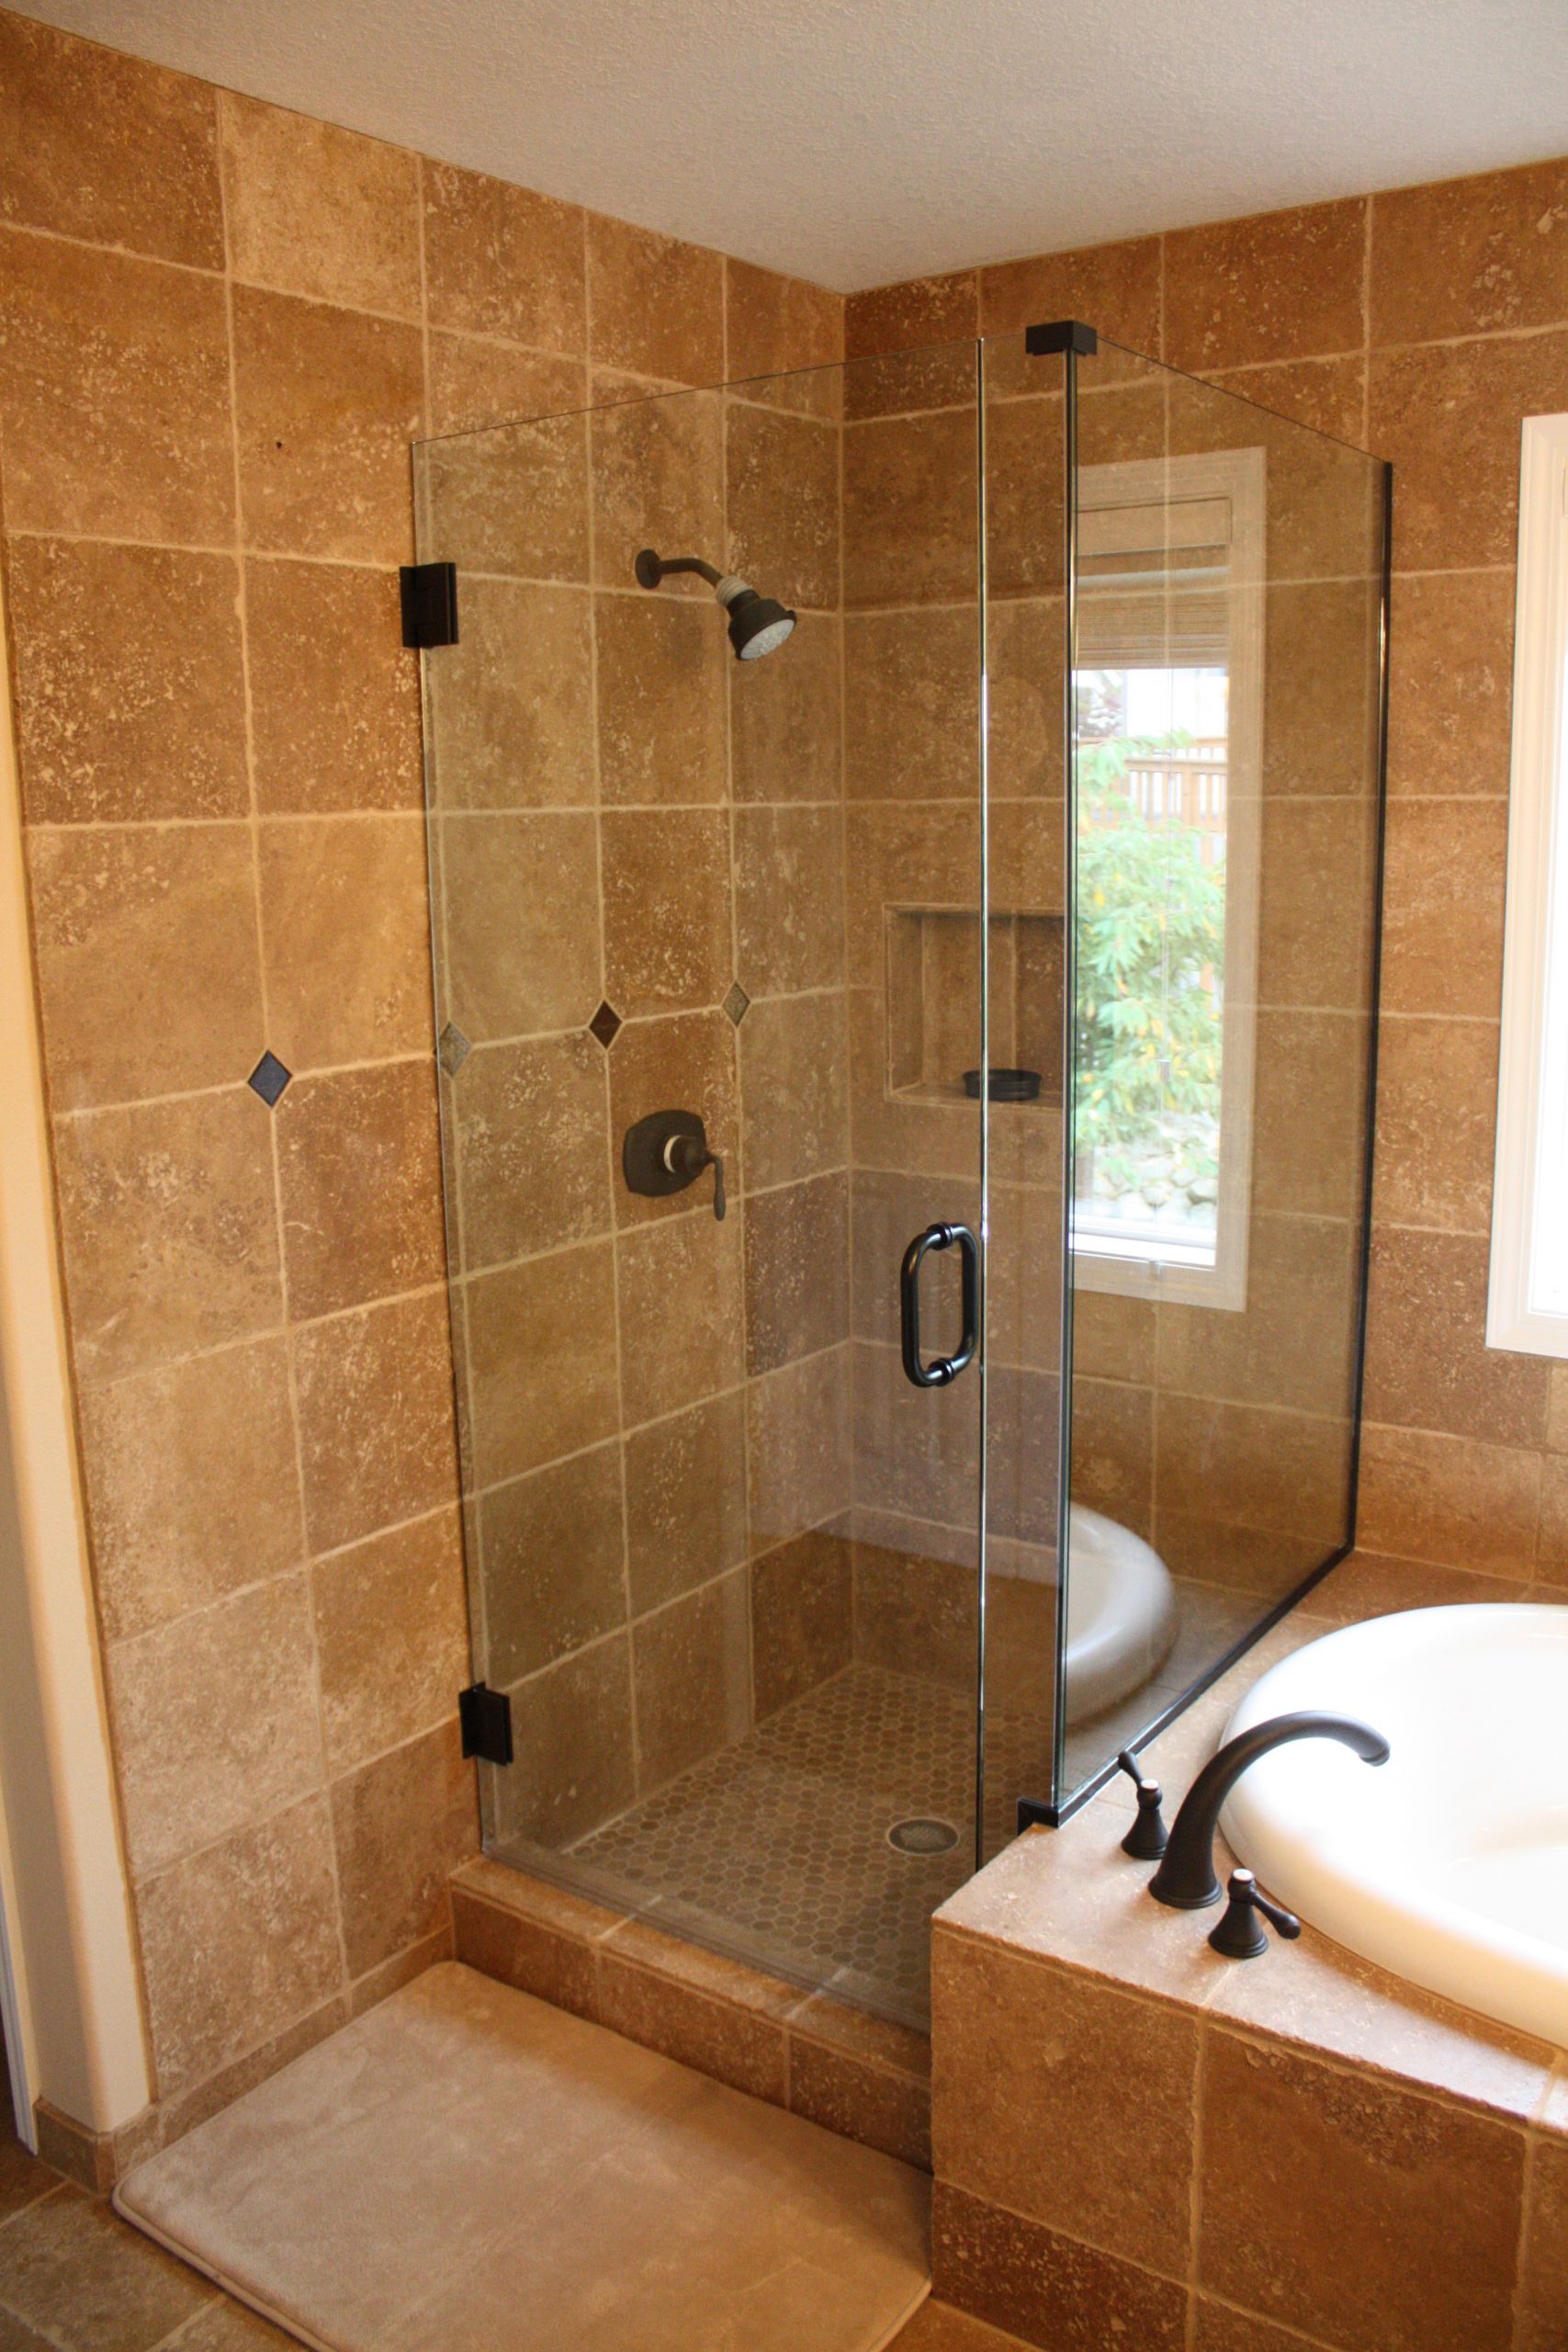 Tile Bathroom Walls
 31 cool ideas and pictures of natural stone bathroom